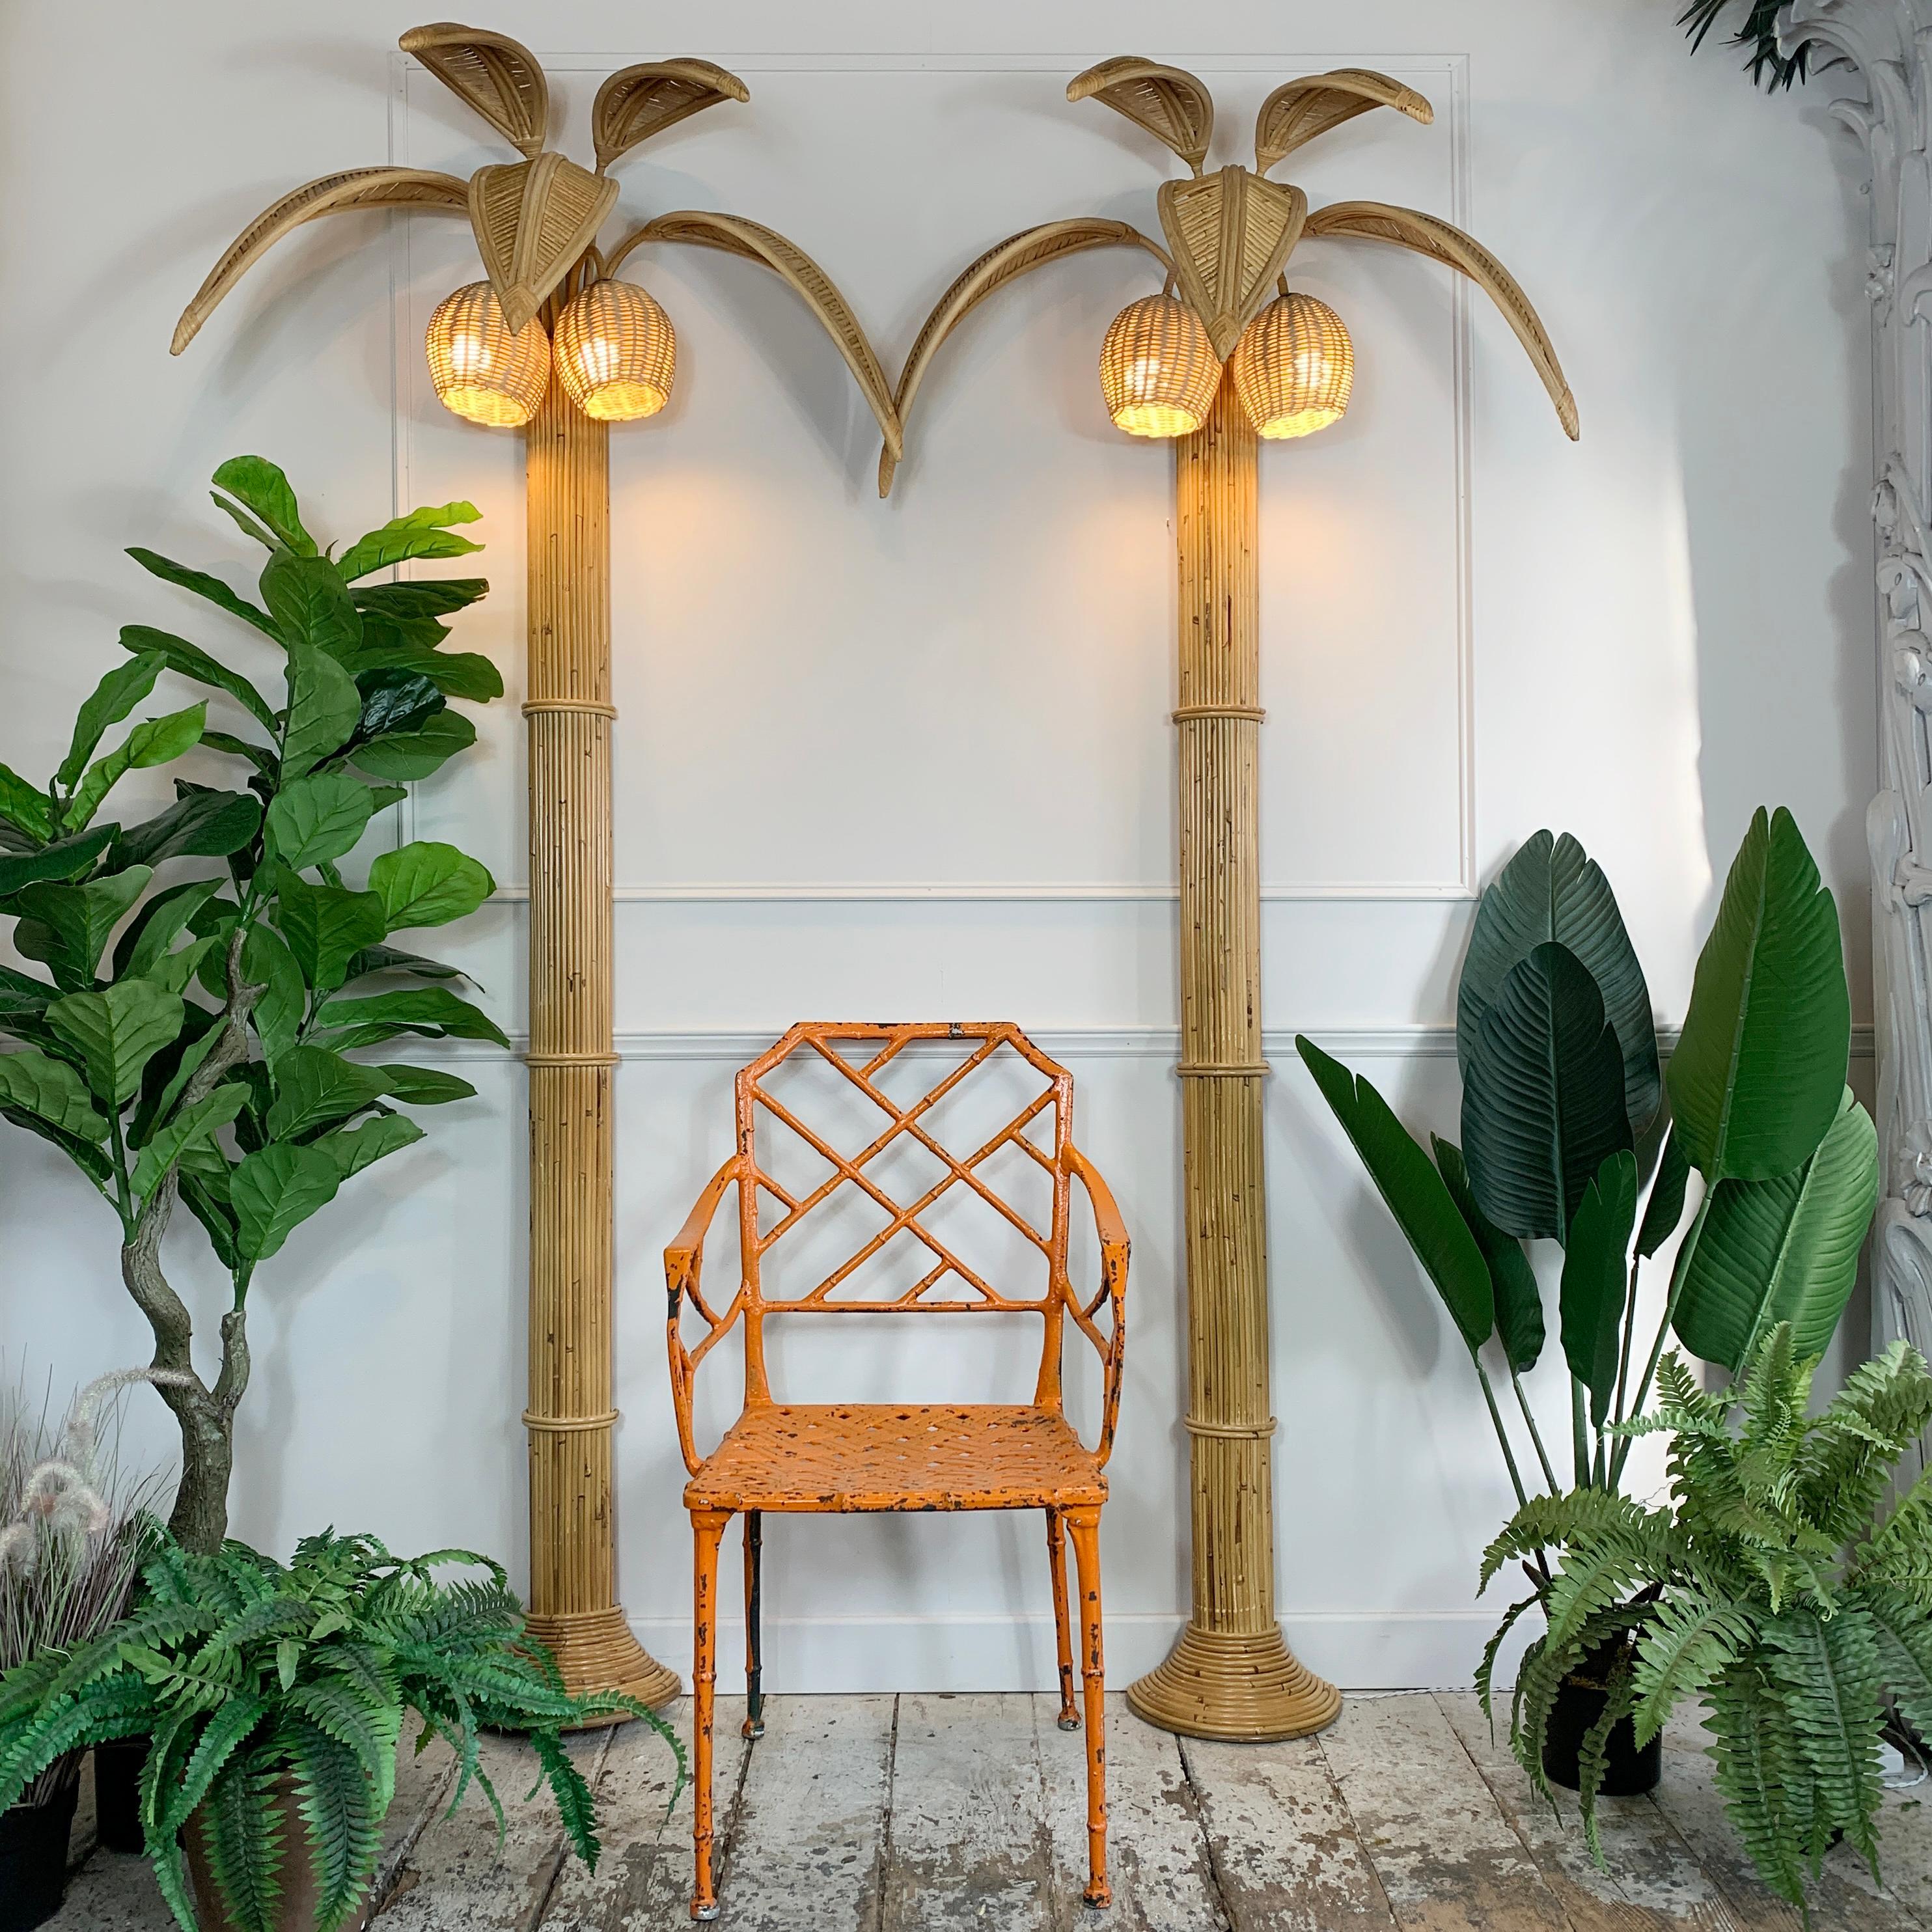 An exceptional pair of wall lights, very much in the manner of Mario Lopez Torres and Vivai Del Sud, these are floor standing wall lights of huge proportions, each with a pair of ‘coconut’ lamp holders, and a canopy of tall palm leaves. Dating to